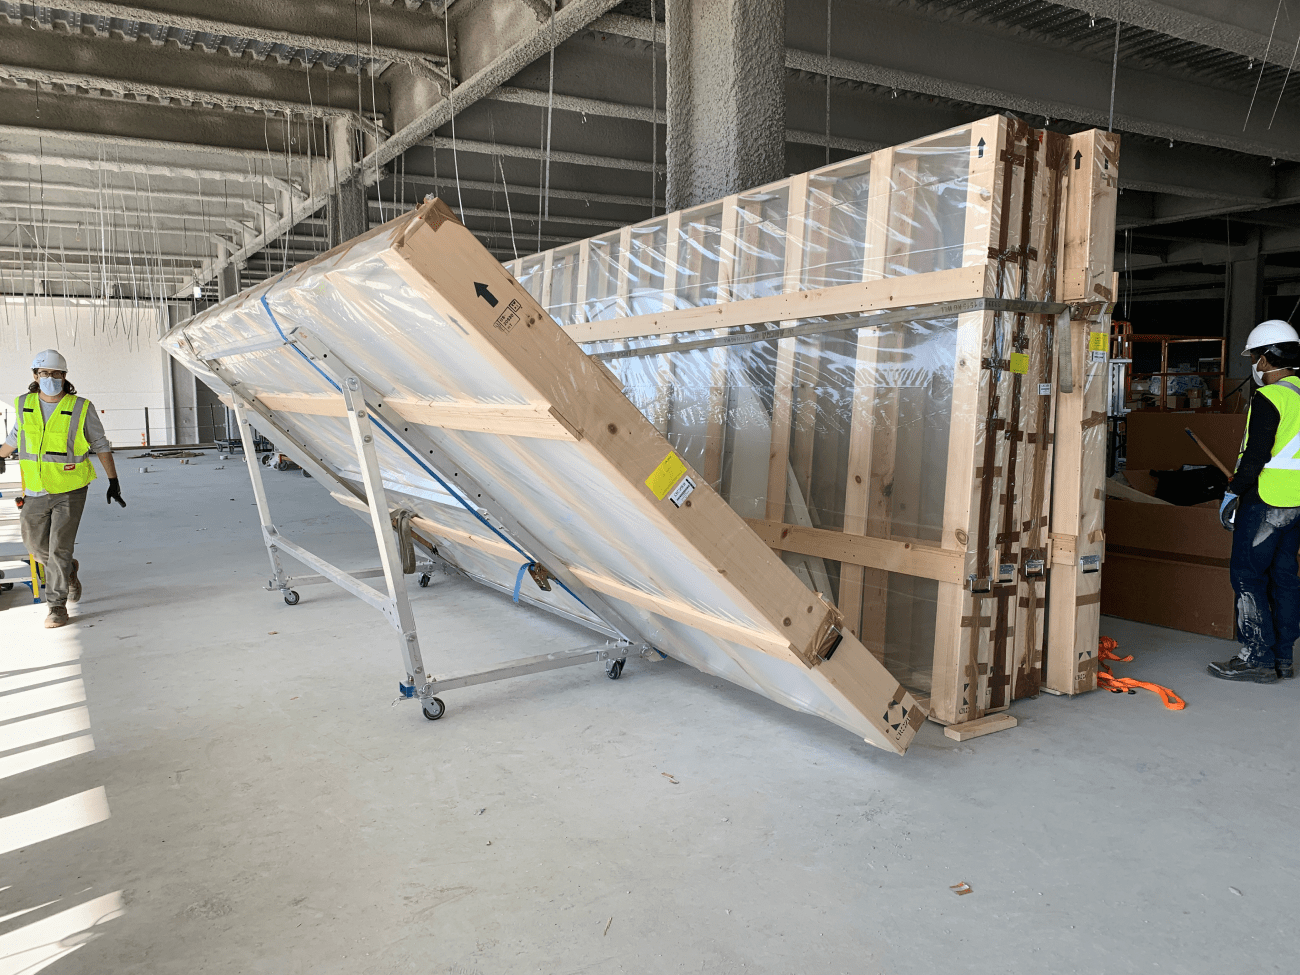 Crozier designed a custom A-frame cart to hold the panels.